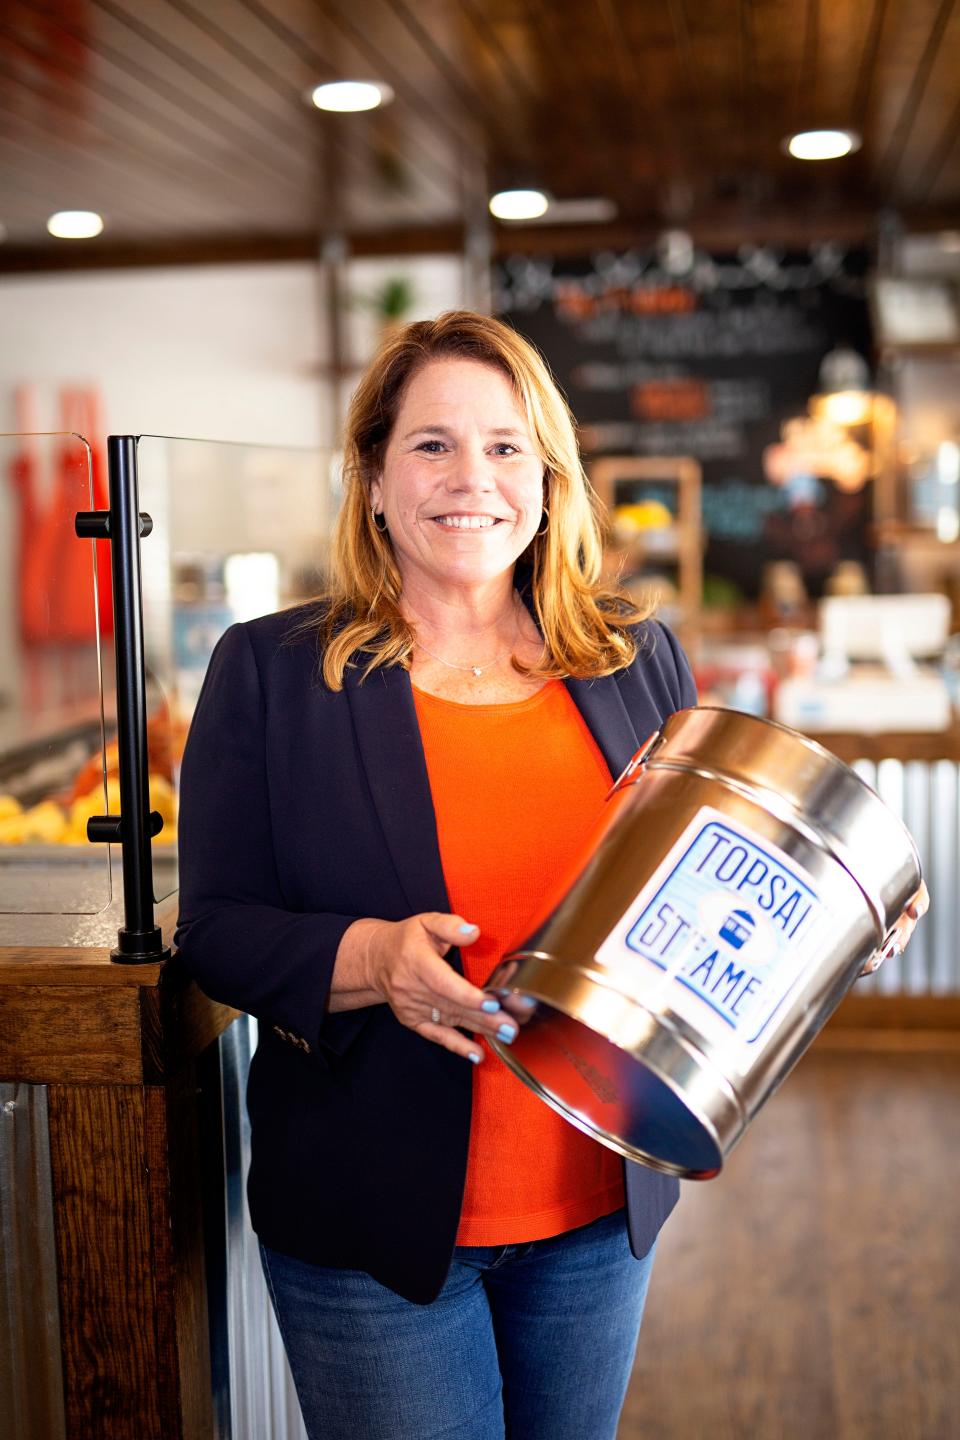 Danielle Mahon is the founder and CEO of Topsail Steamer